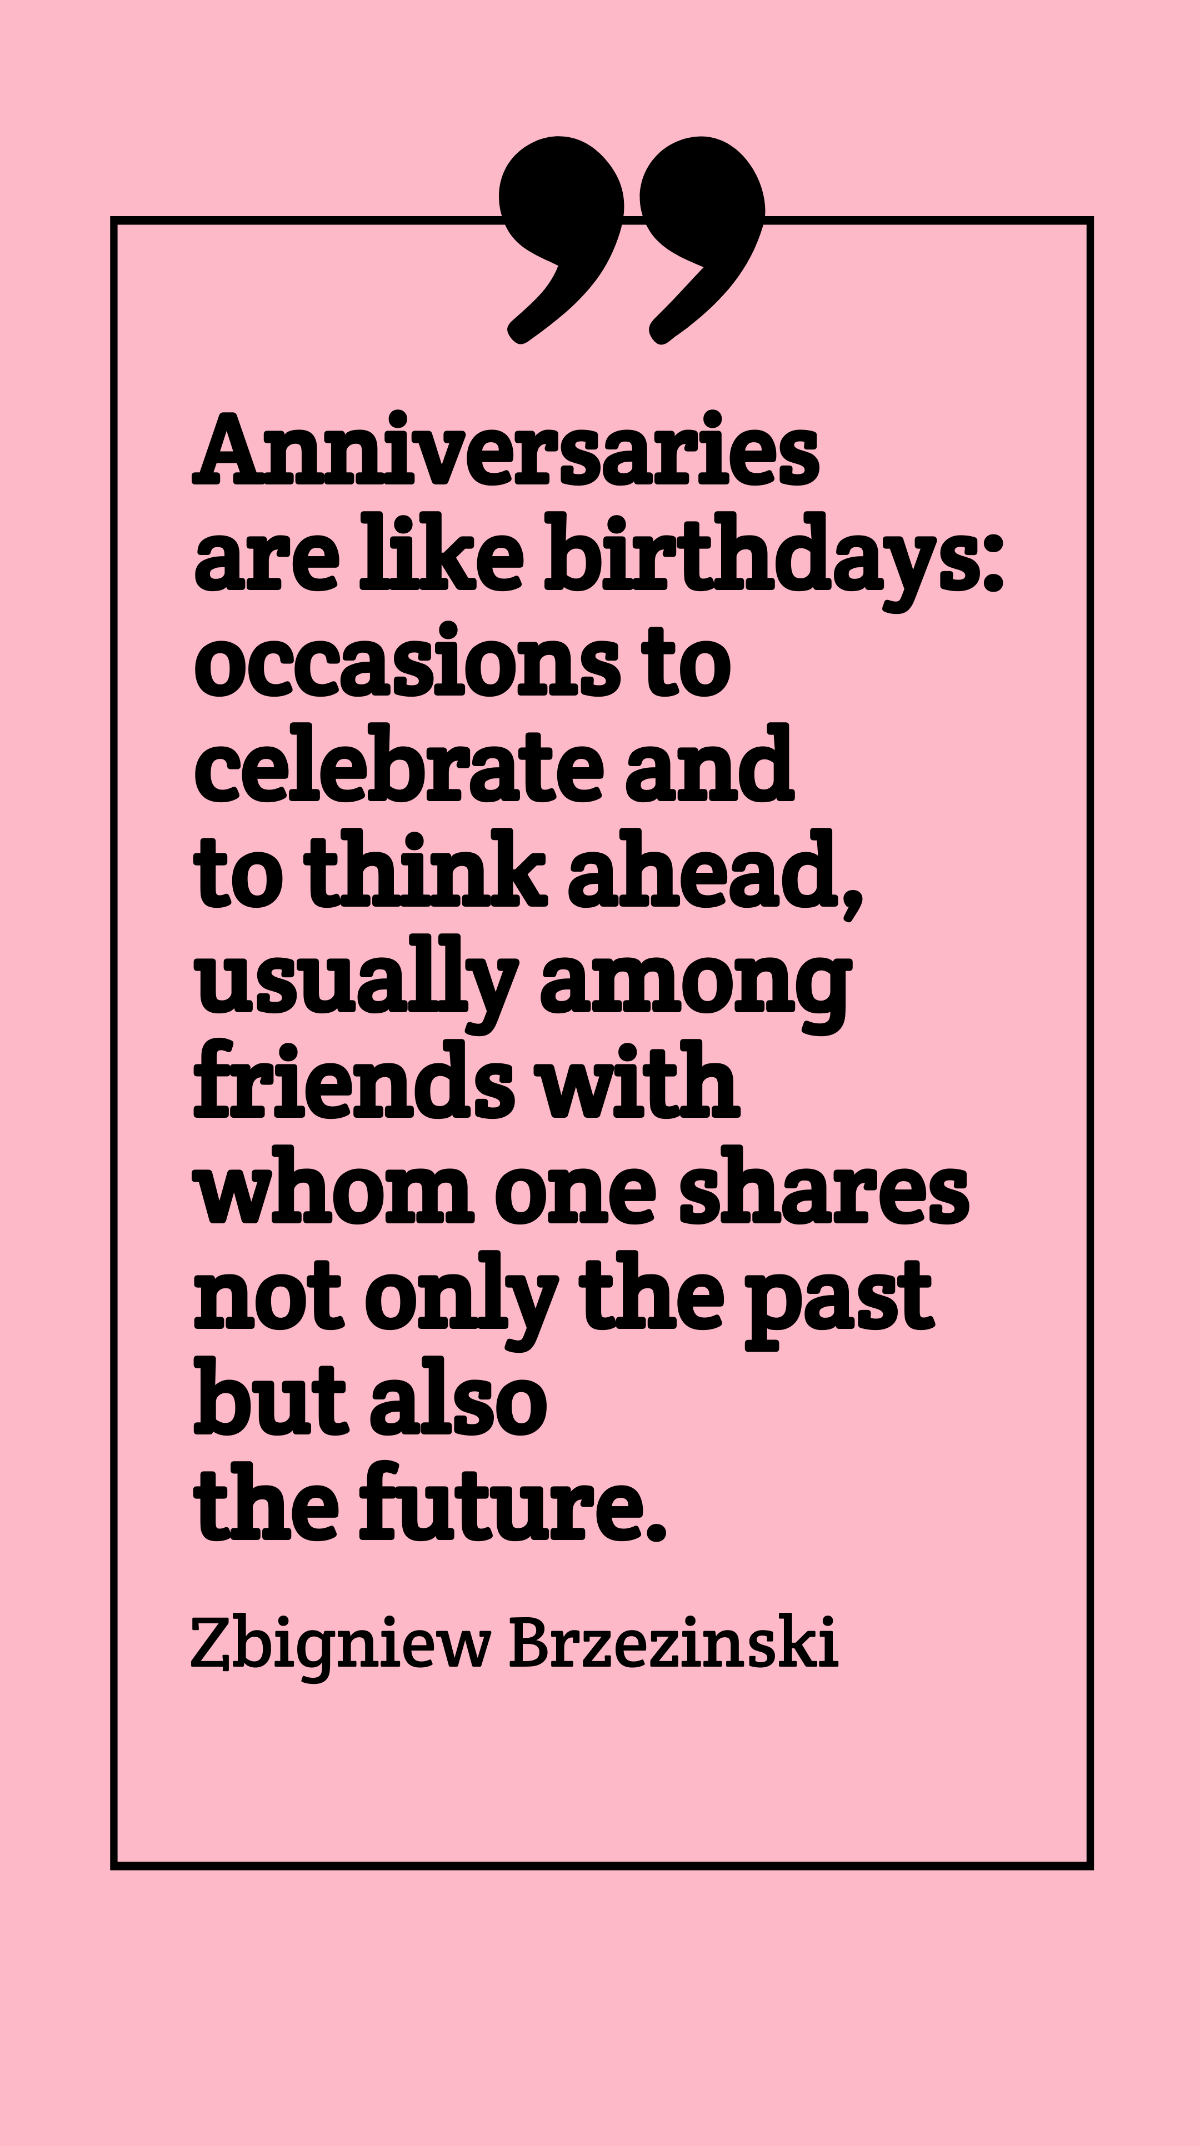 Free Zbigniew Brzezinski - Anniversaries are like birthdays: occasions to celebrate and to think ahead, usually among friends with whom one shares not only the past but also the future. Template